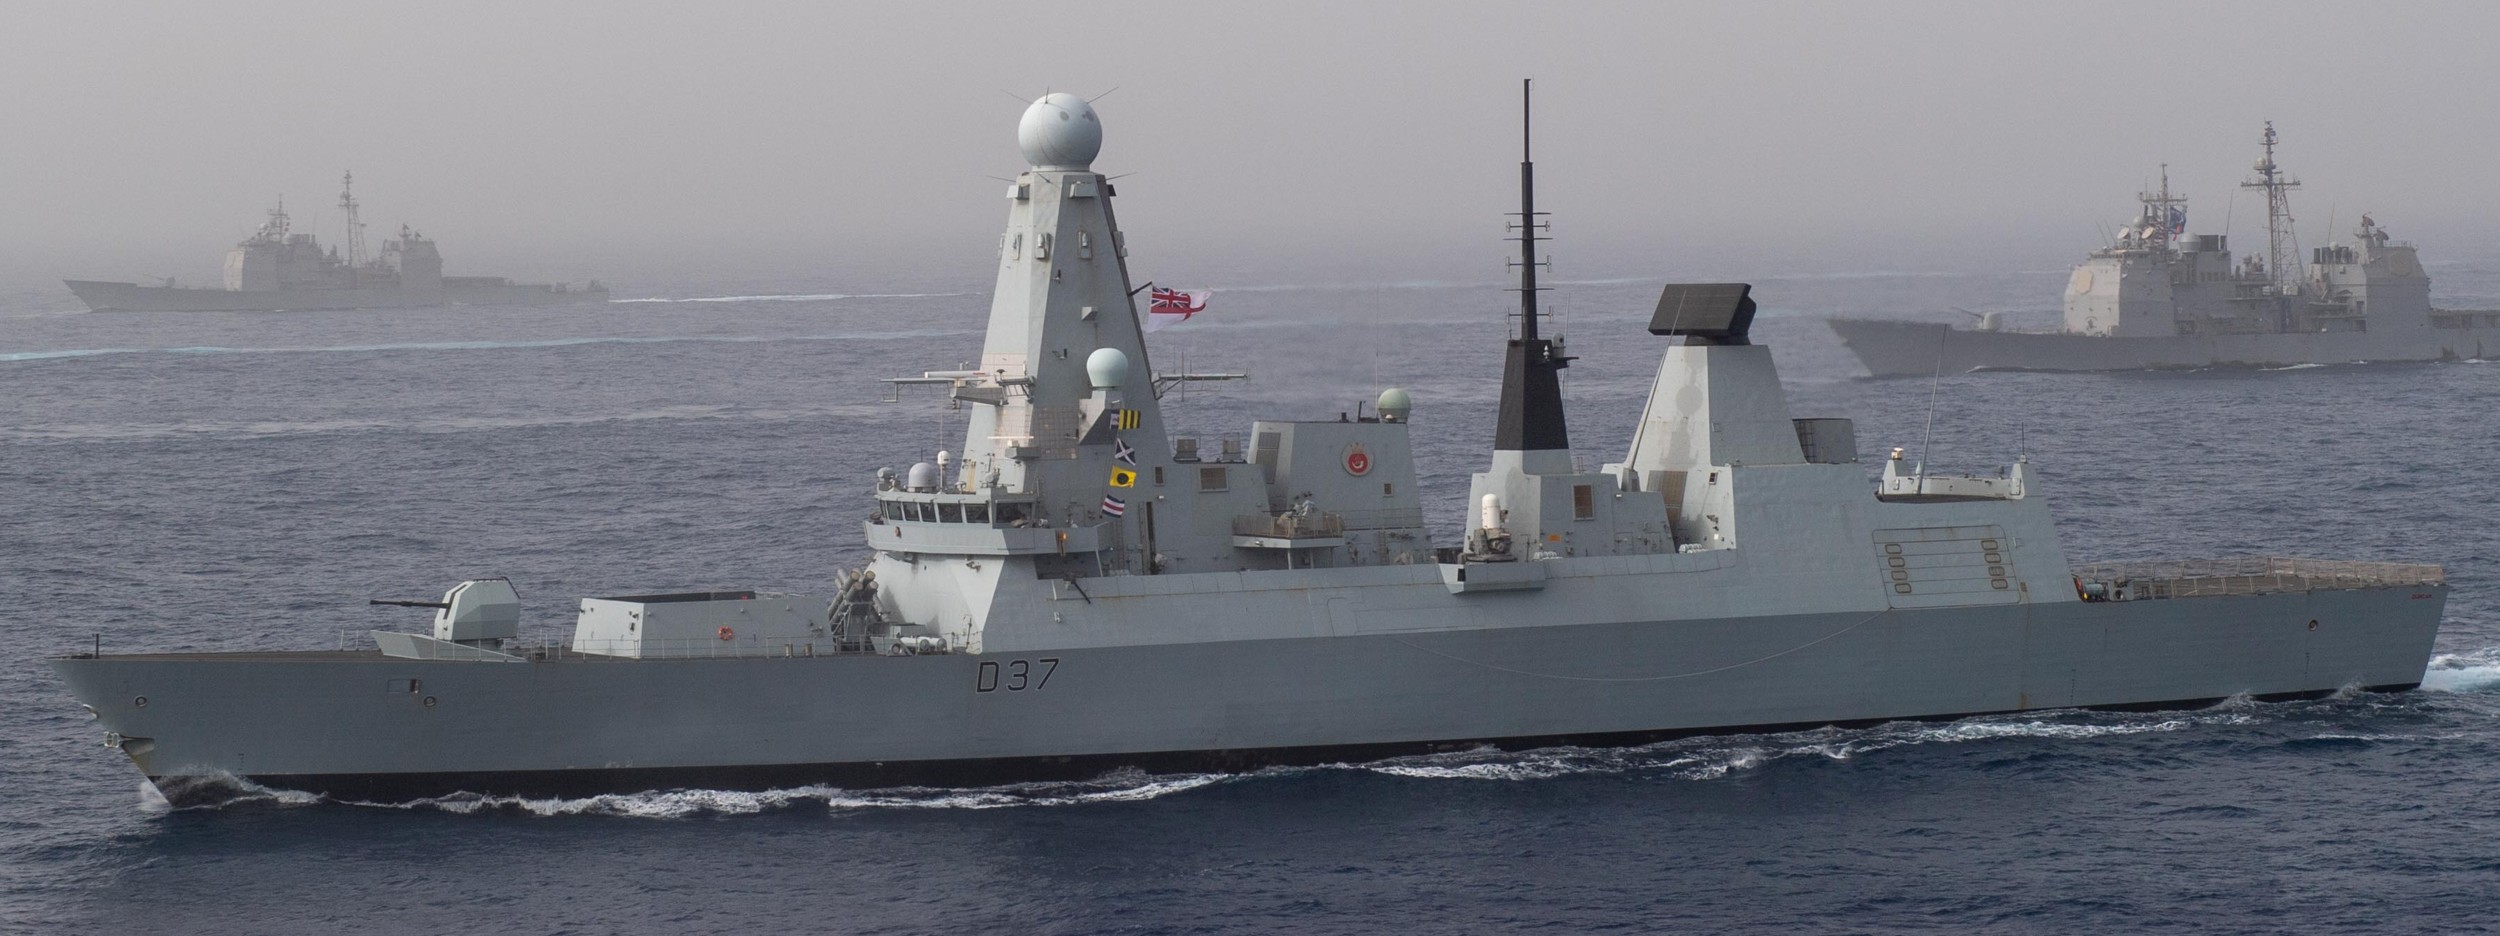 hms duncan d-37 type 45 daring class guided missile destroyer ddg royal navy sea viper paams 29